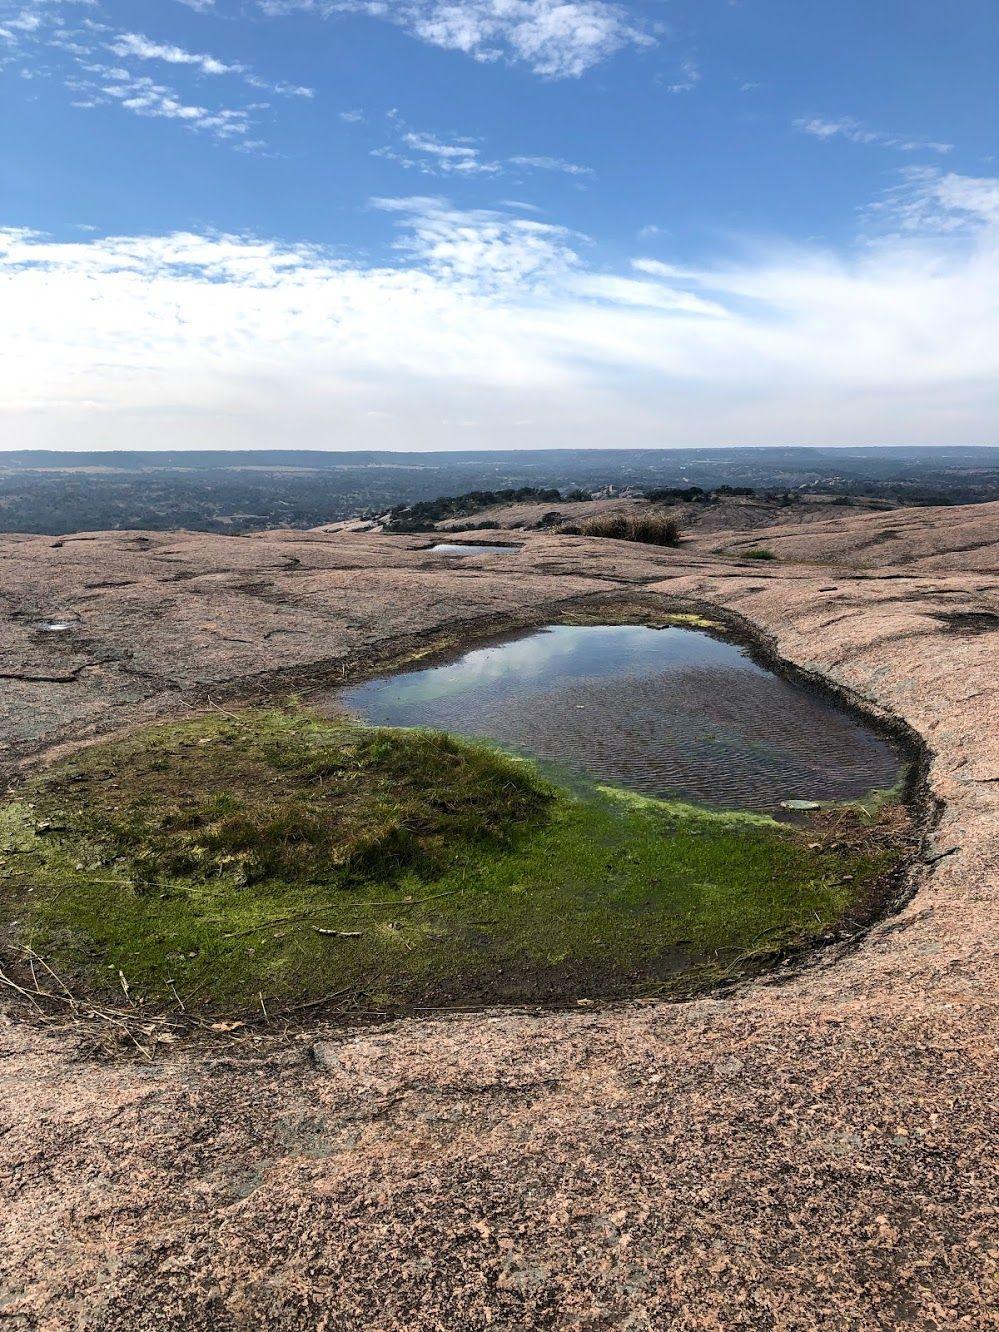 A rock face with a pool of water at Enchanted Rock.